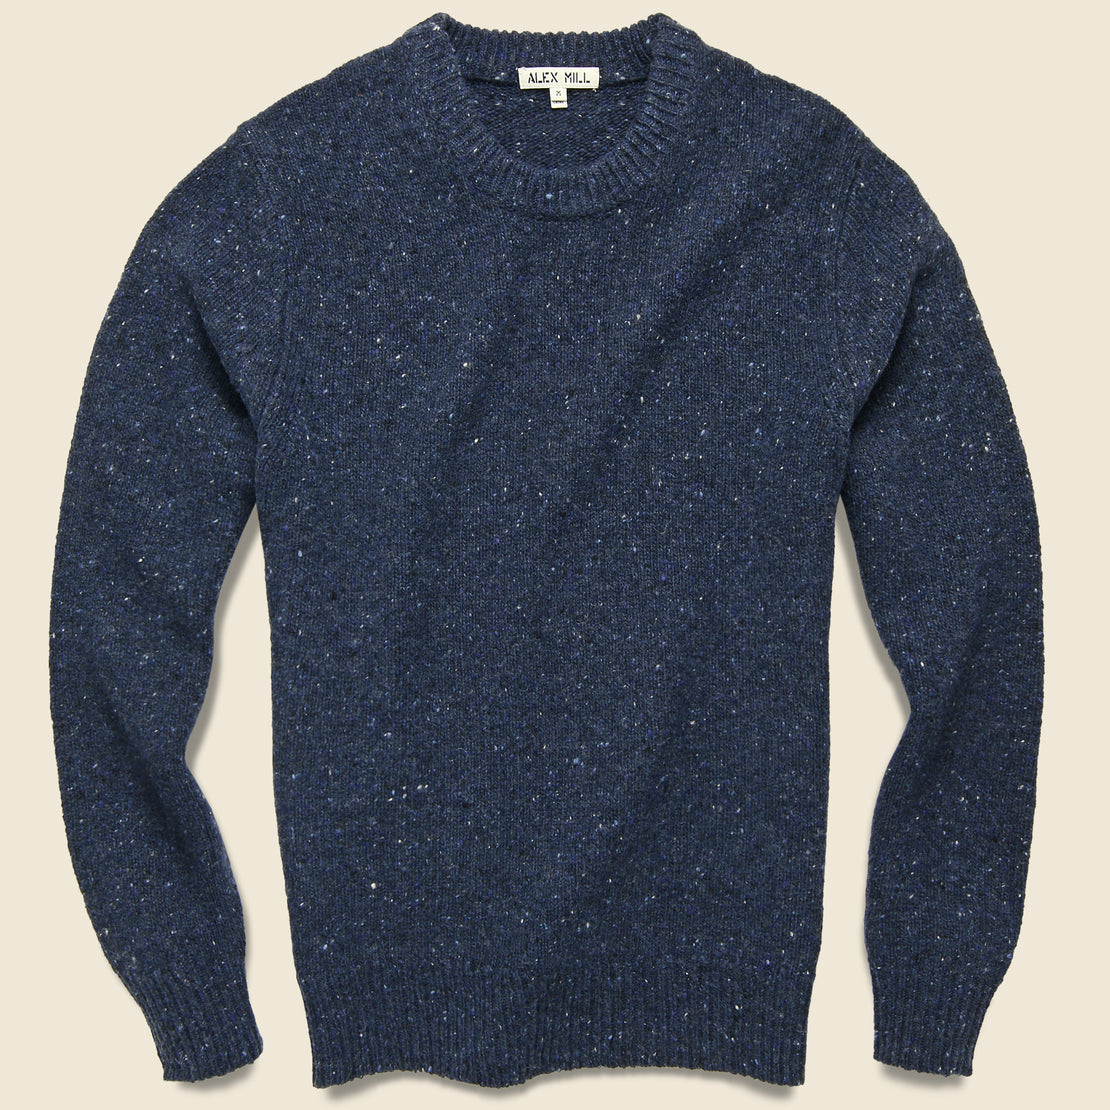 Donegal Crew Neck Sweater - Fisherman